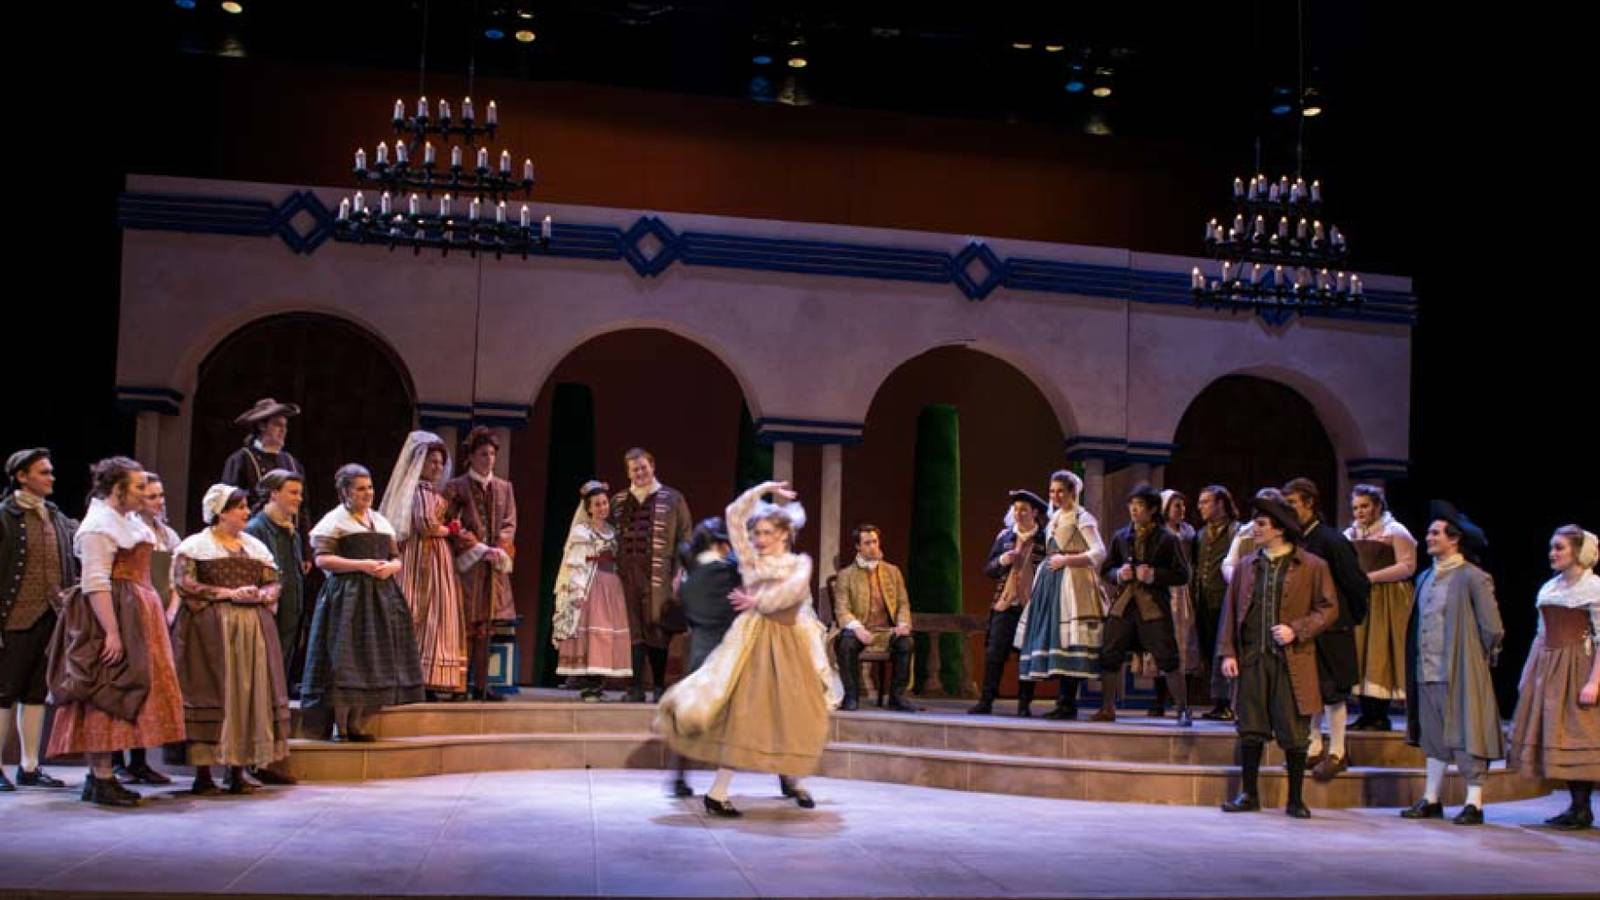 Scene in The Marriage of Figaro.